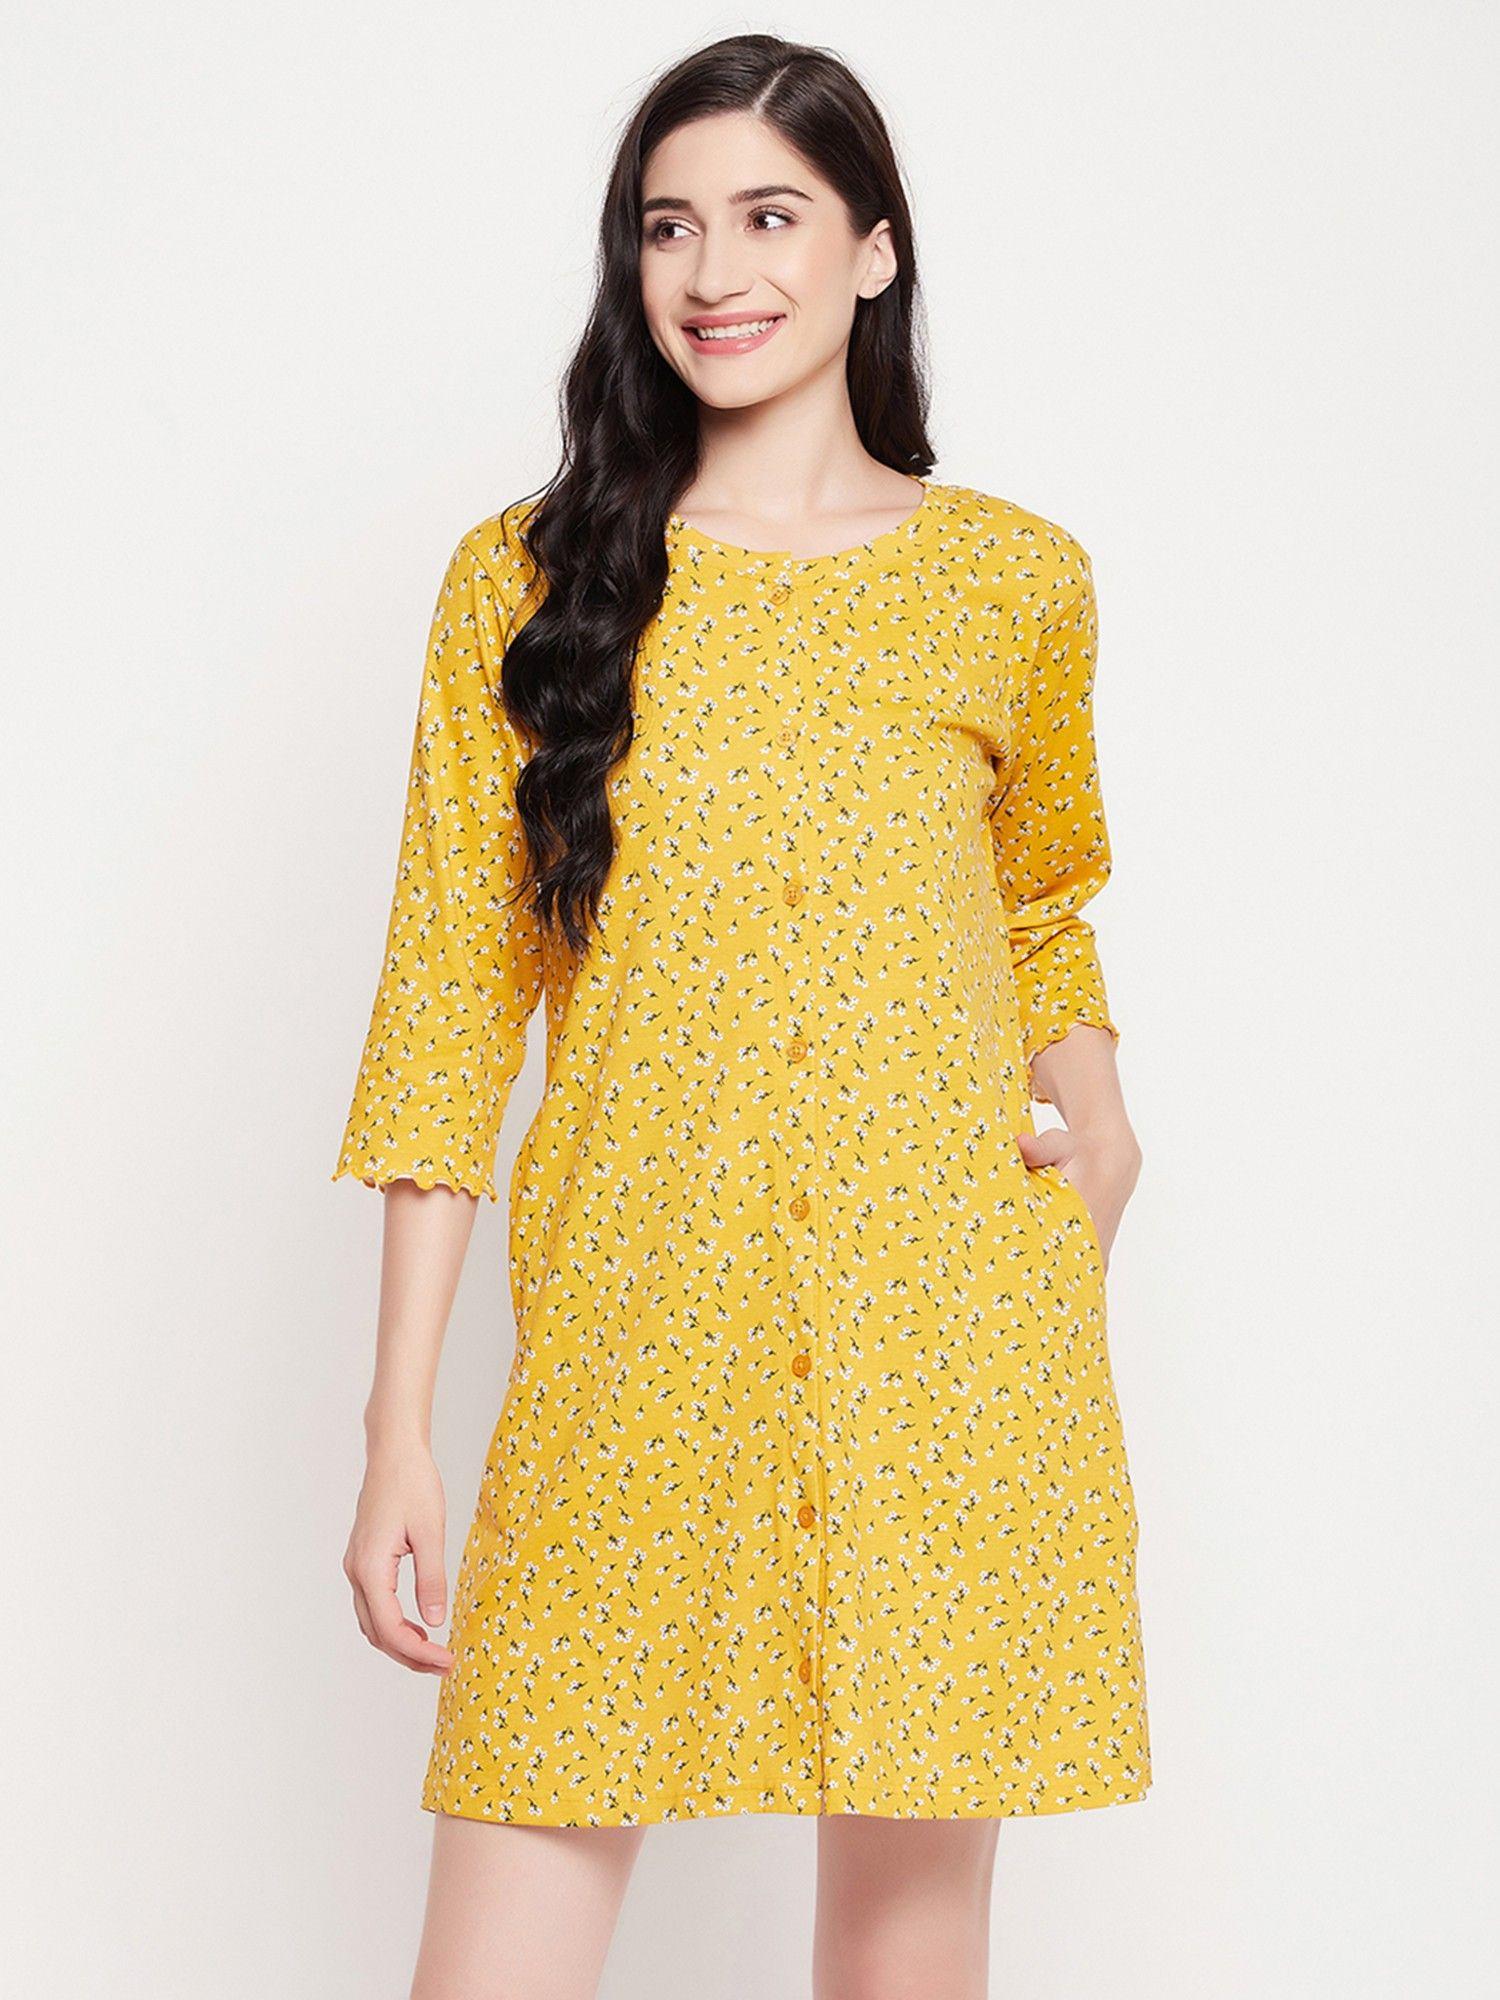 print-me-pretty-button-me-up-short-night-dress-with-pocket-yellow